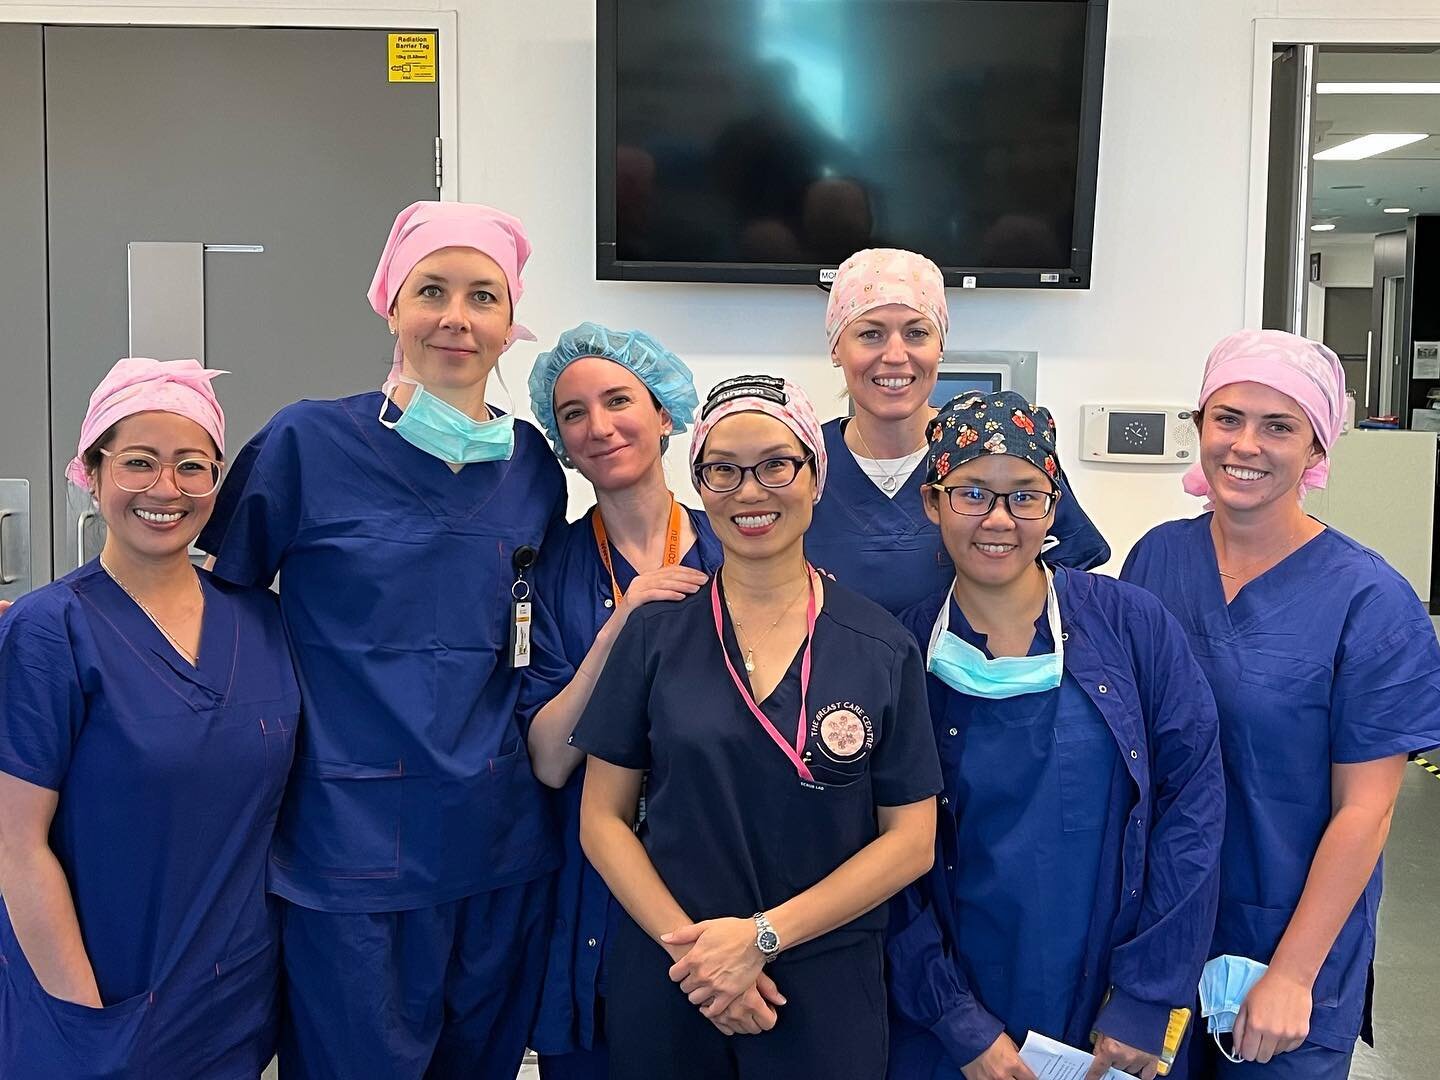 On International Women&rsquo;s Day, we are operating in a female-dominated theatre!  Here are all the reasons I think women in surgery rock. 

1. Nature has sorted it so we learn to function on very little sleep. (Read: newborns)

2. There is no glas